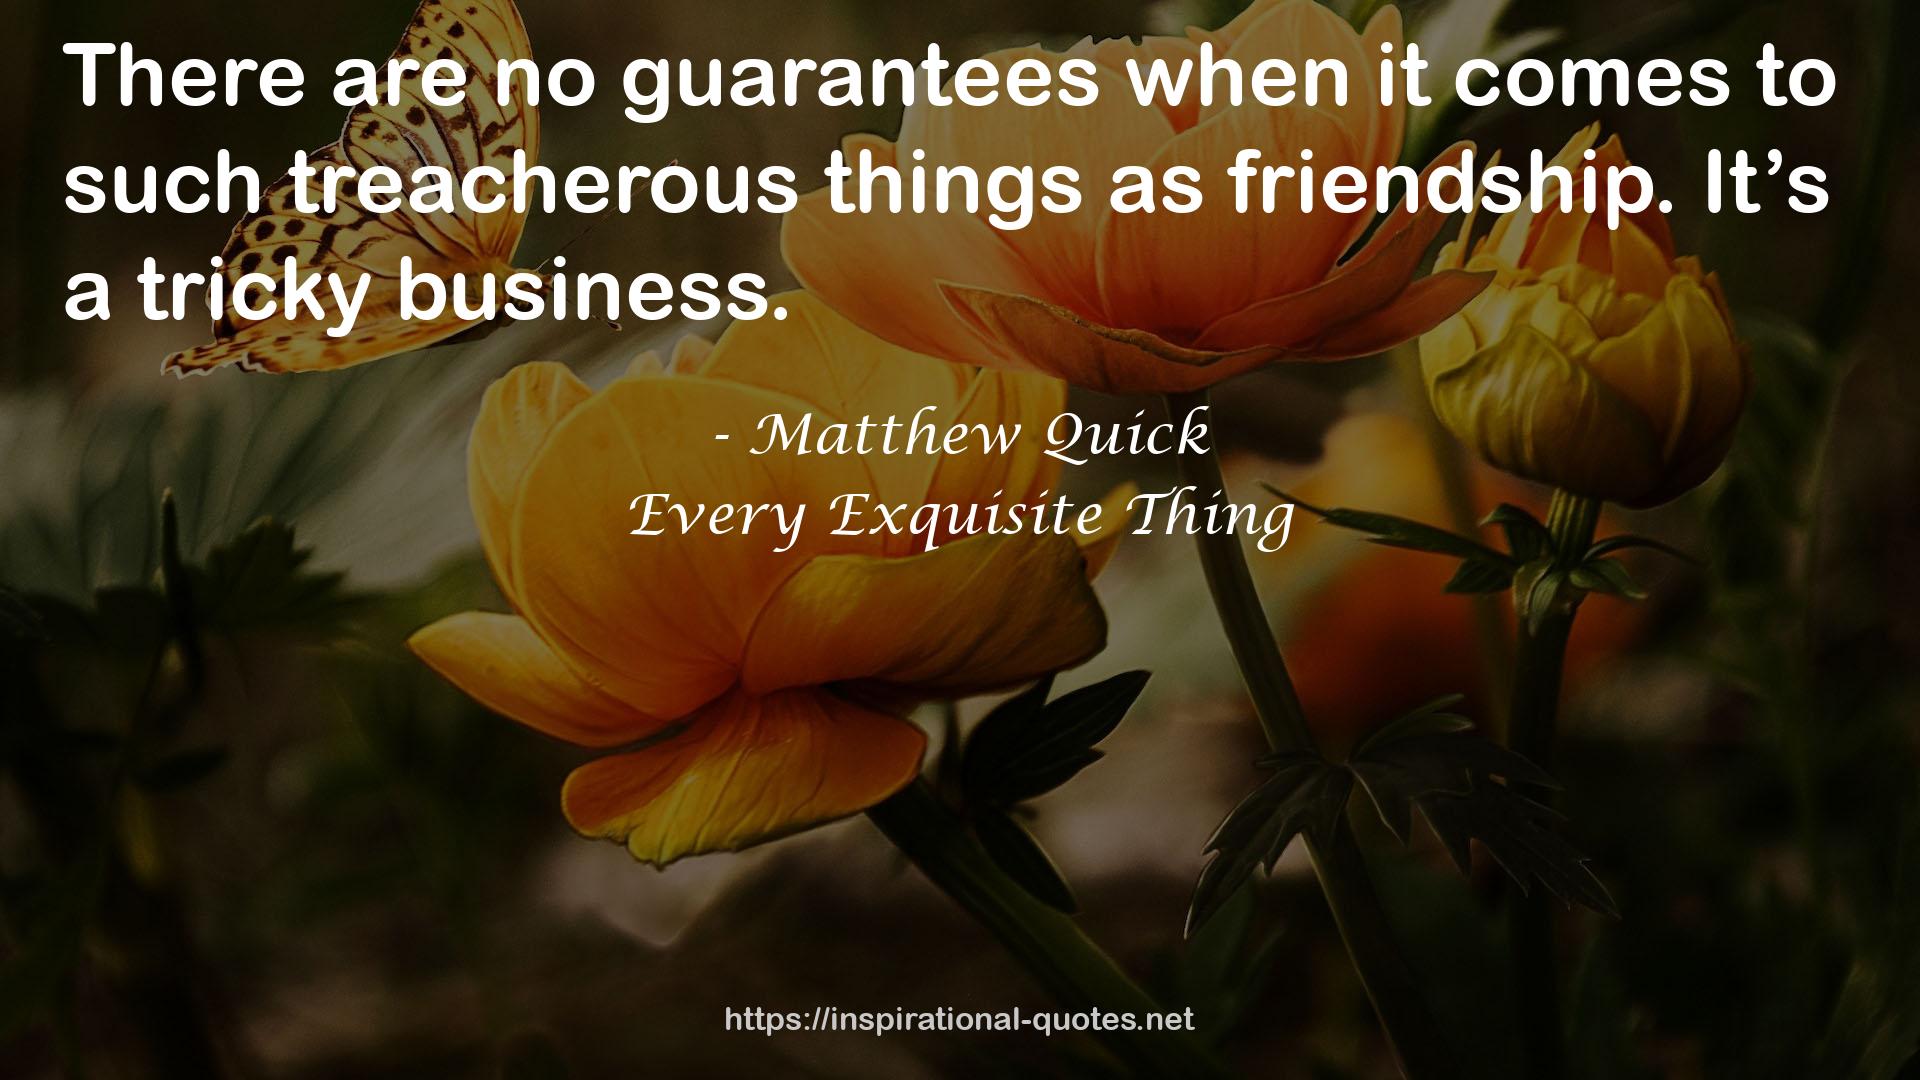 Every Exquisite Thing QUOTES